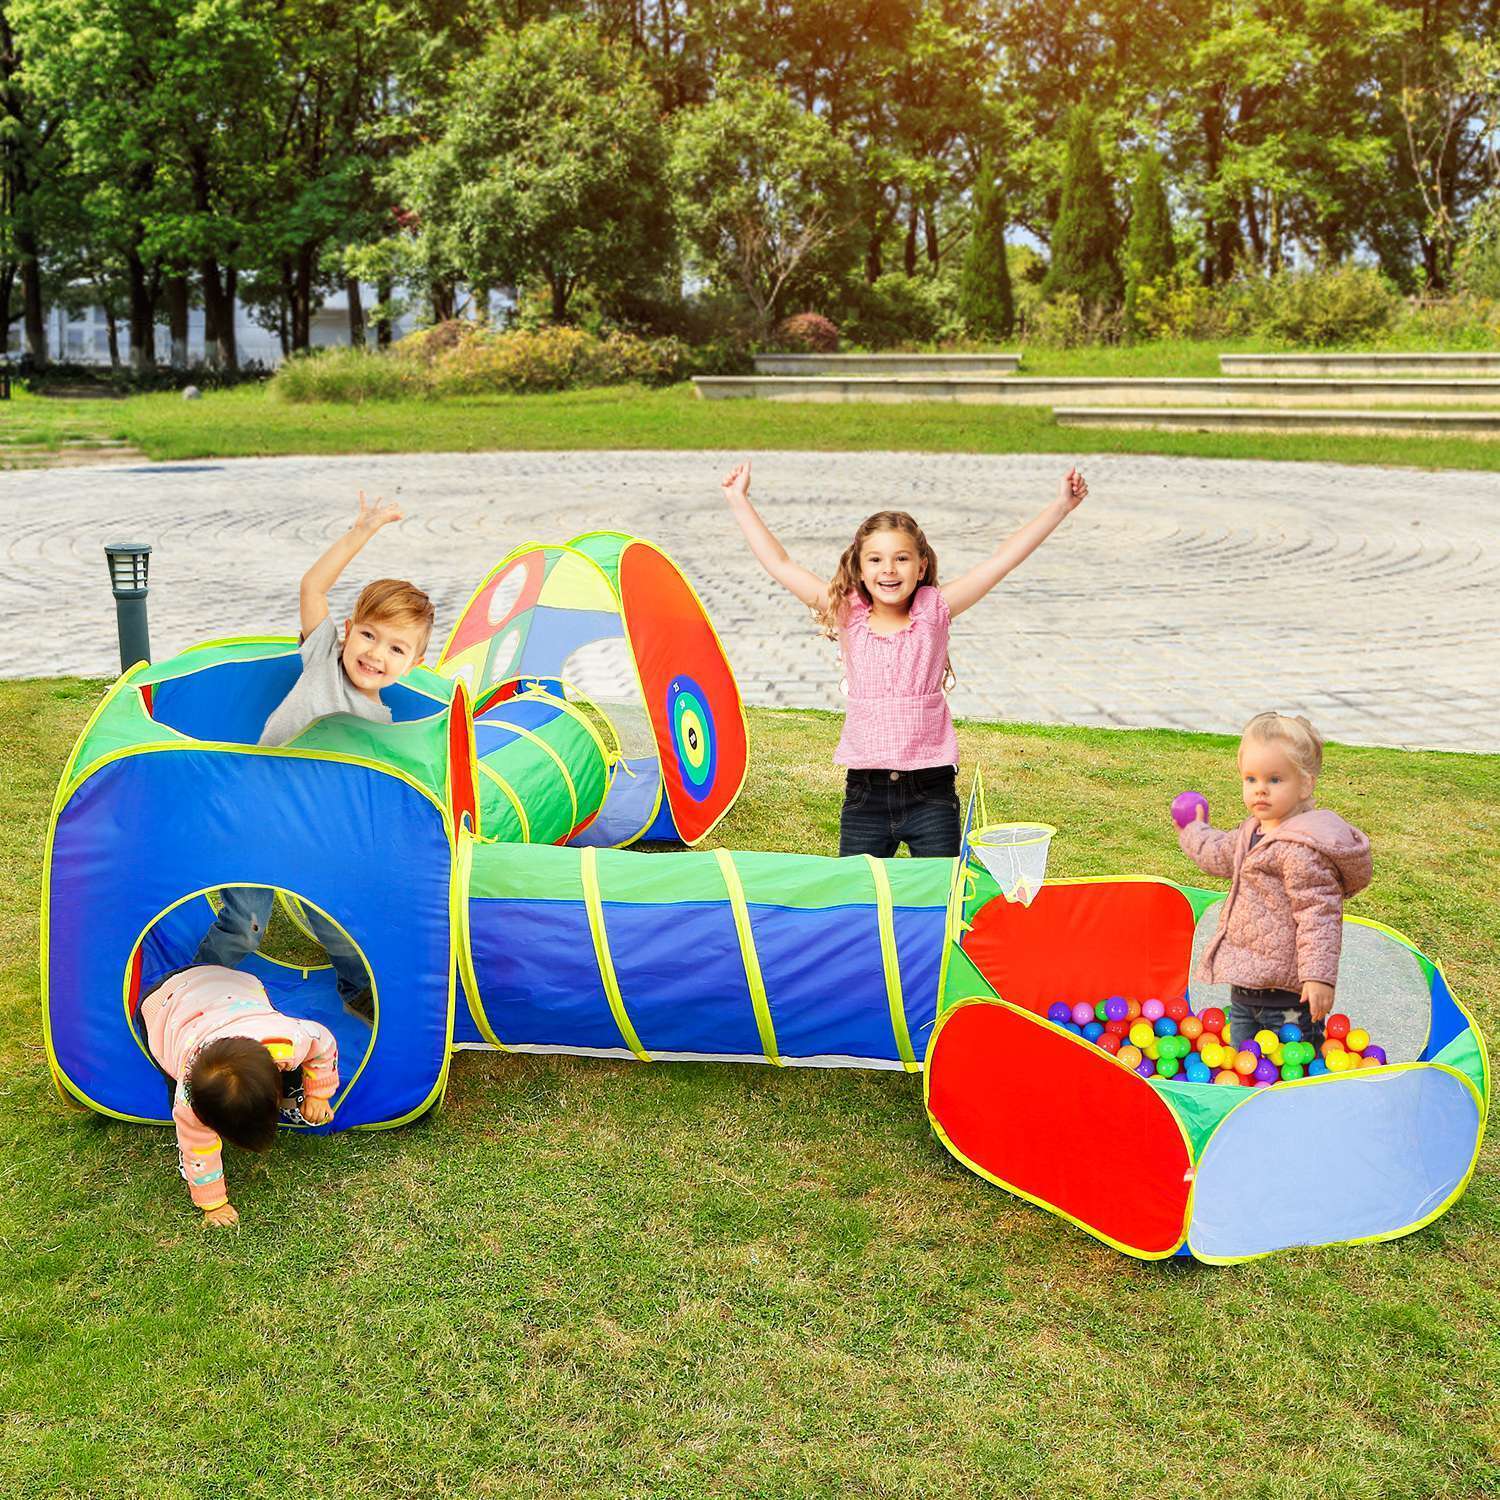 5-in-1 Kids Ball Pit Play Tent w/2 Crawl Tunnel Portable Travel Home Play House sunshining168 Does Not Apply - фотография #4